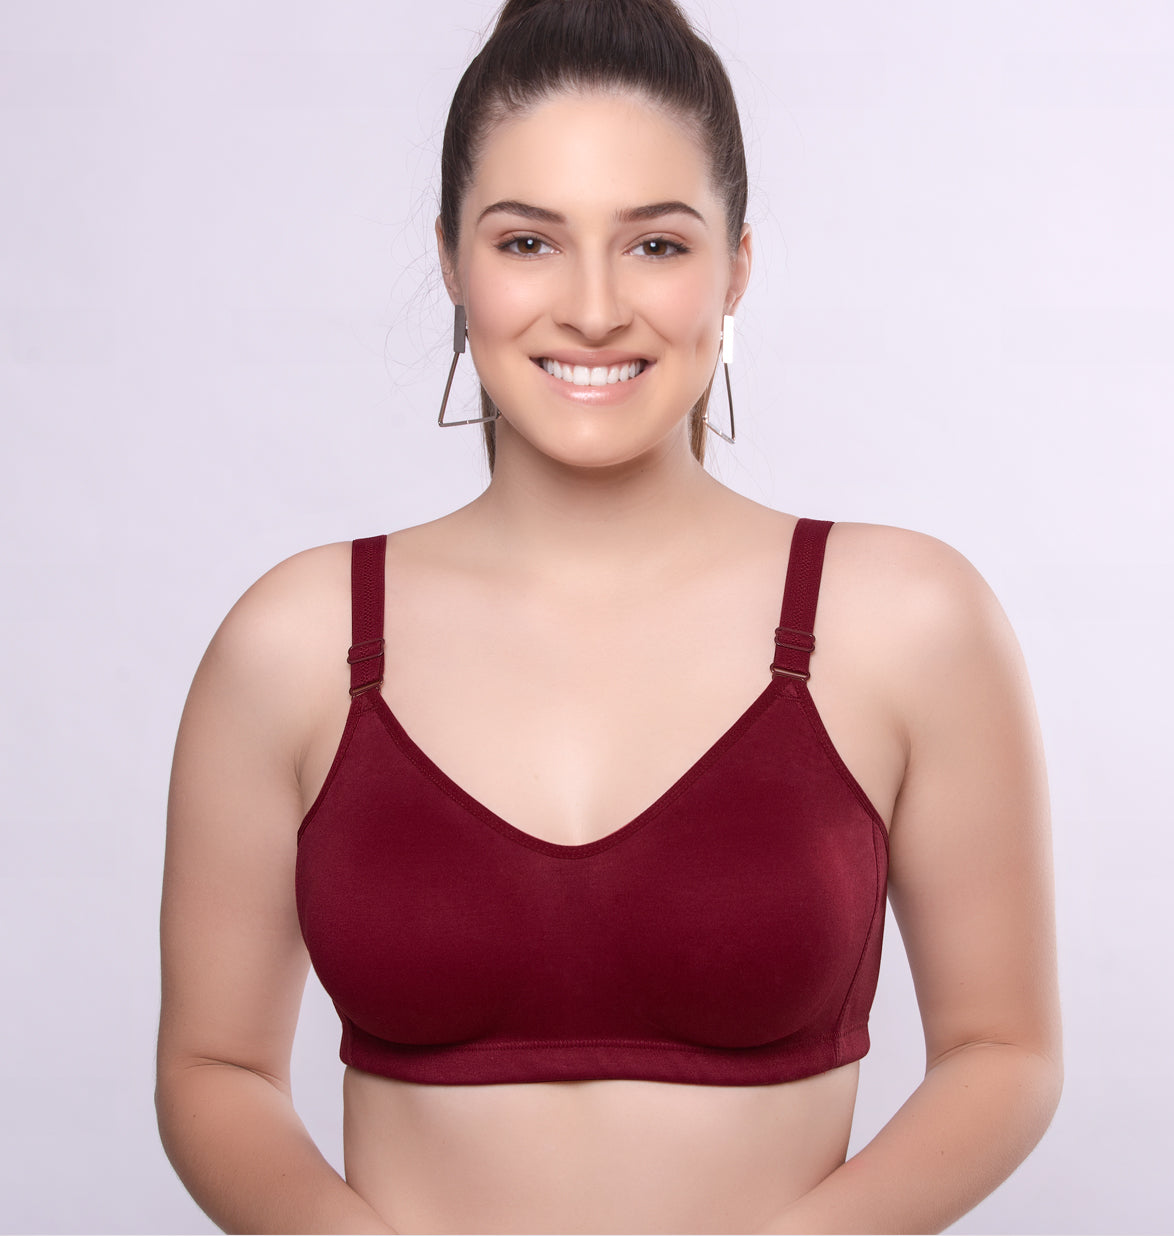 Riza Superfit is unique bra which fulfils multiple requirements